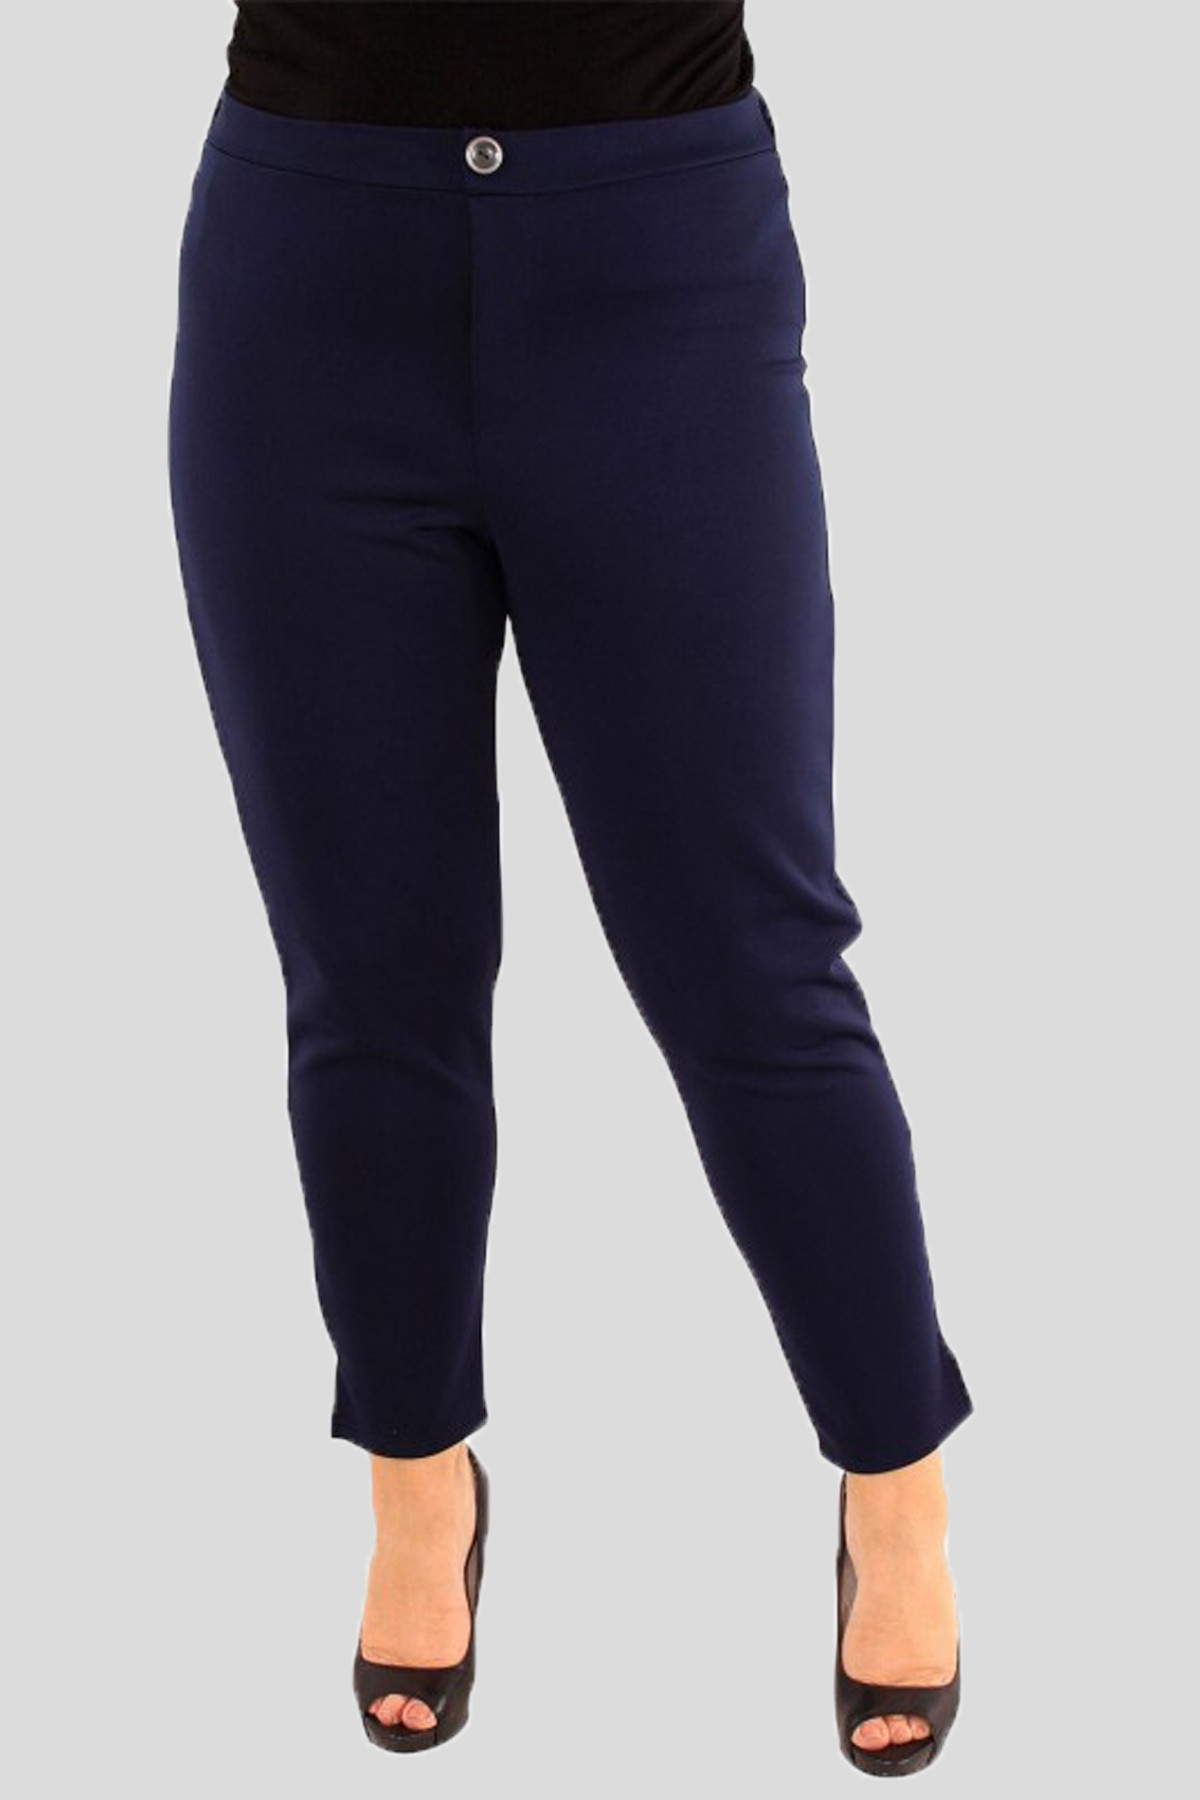 Eloquii Navy Blue Wide Leg Trousers with Light Blue Racing Stripe Side   The Plus Bus Boutique